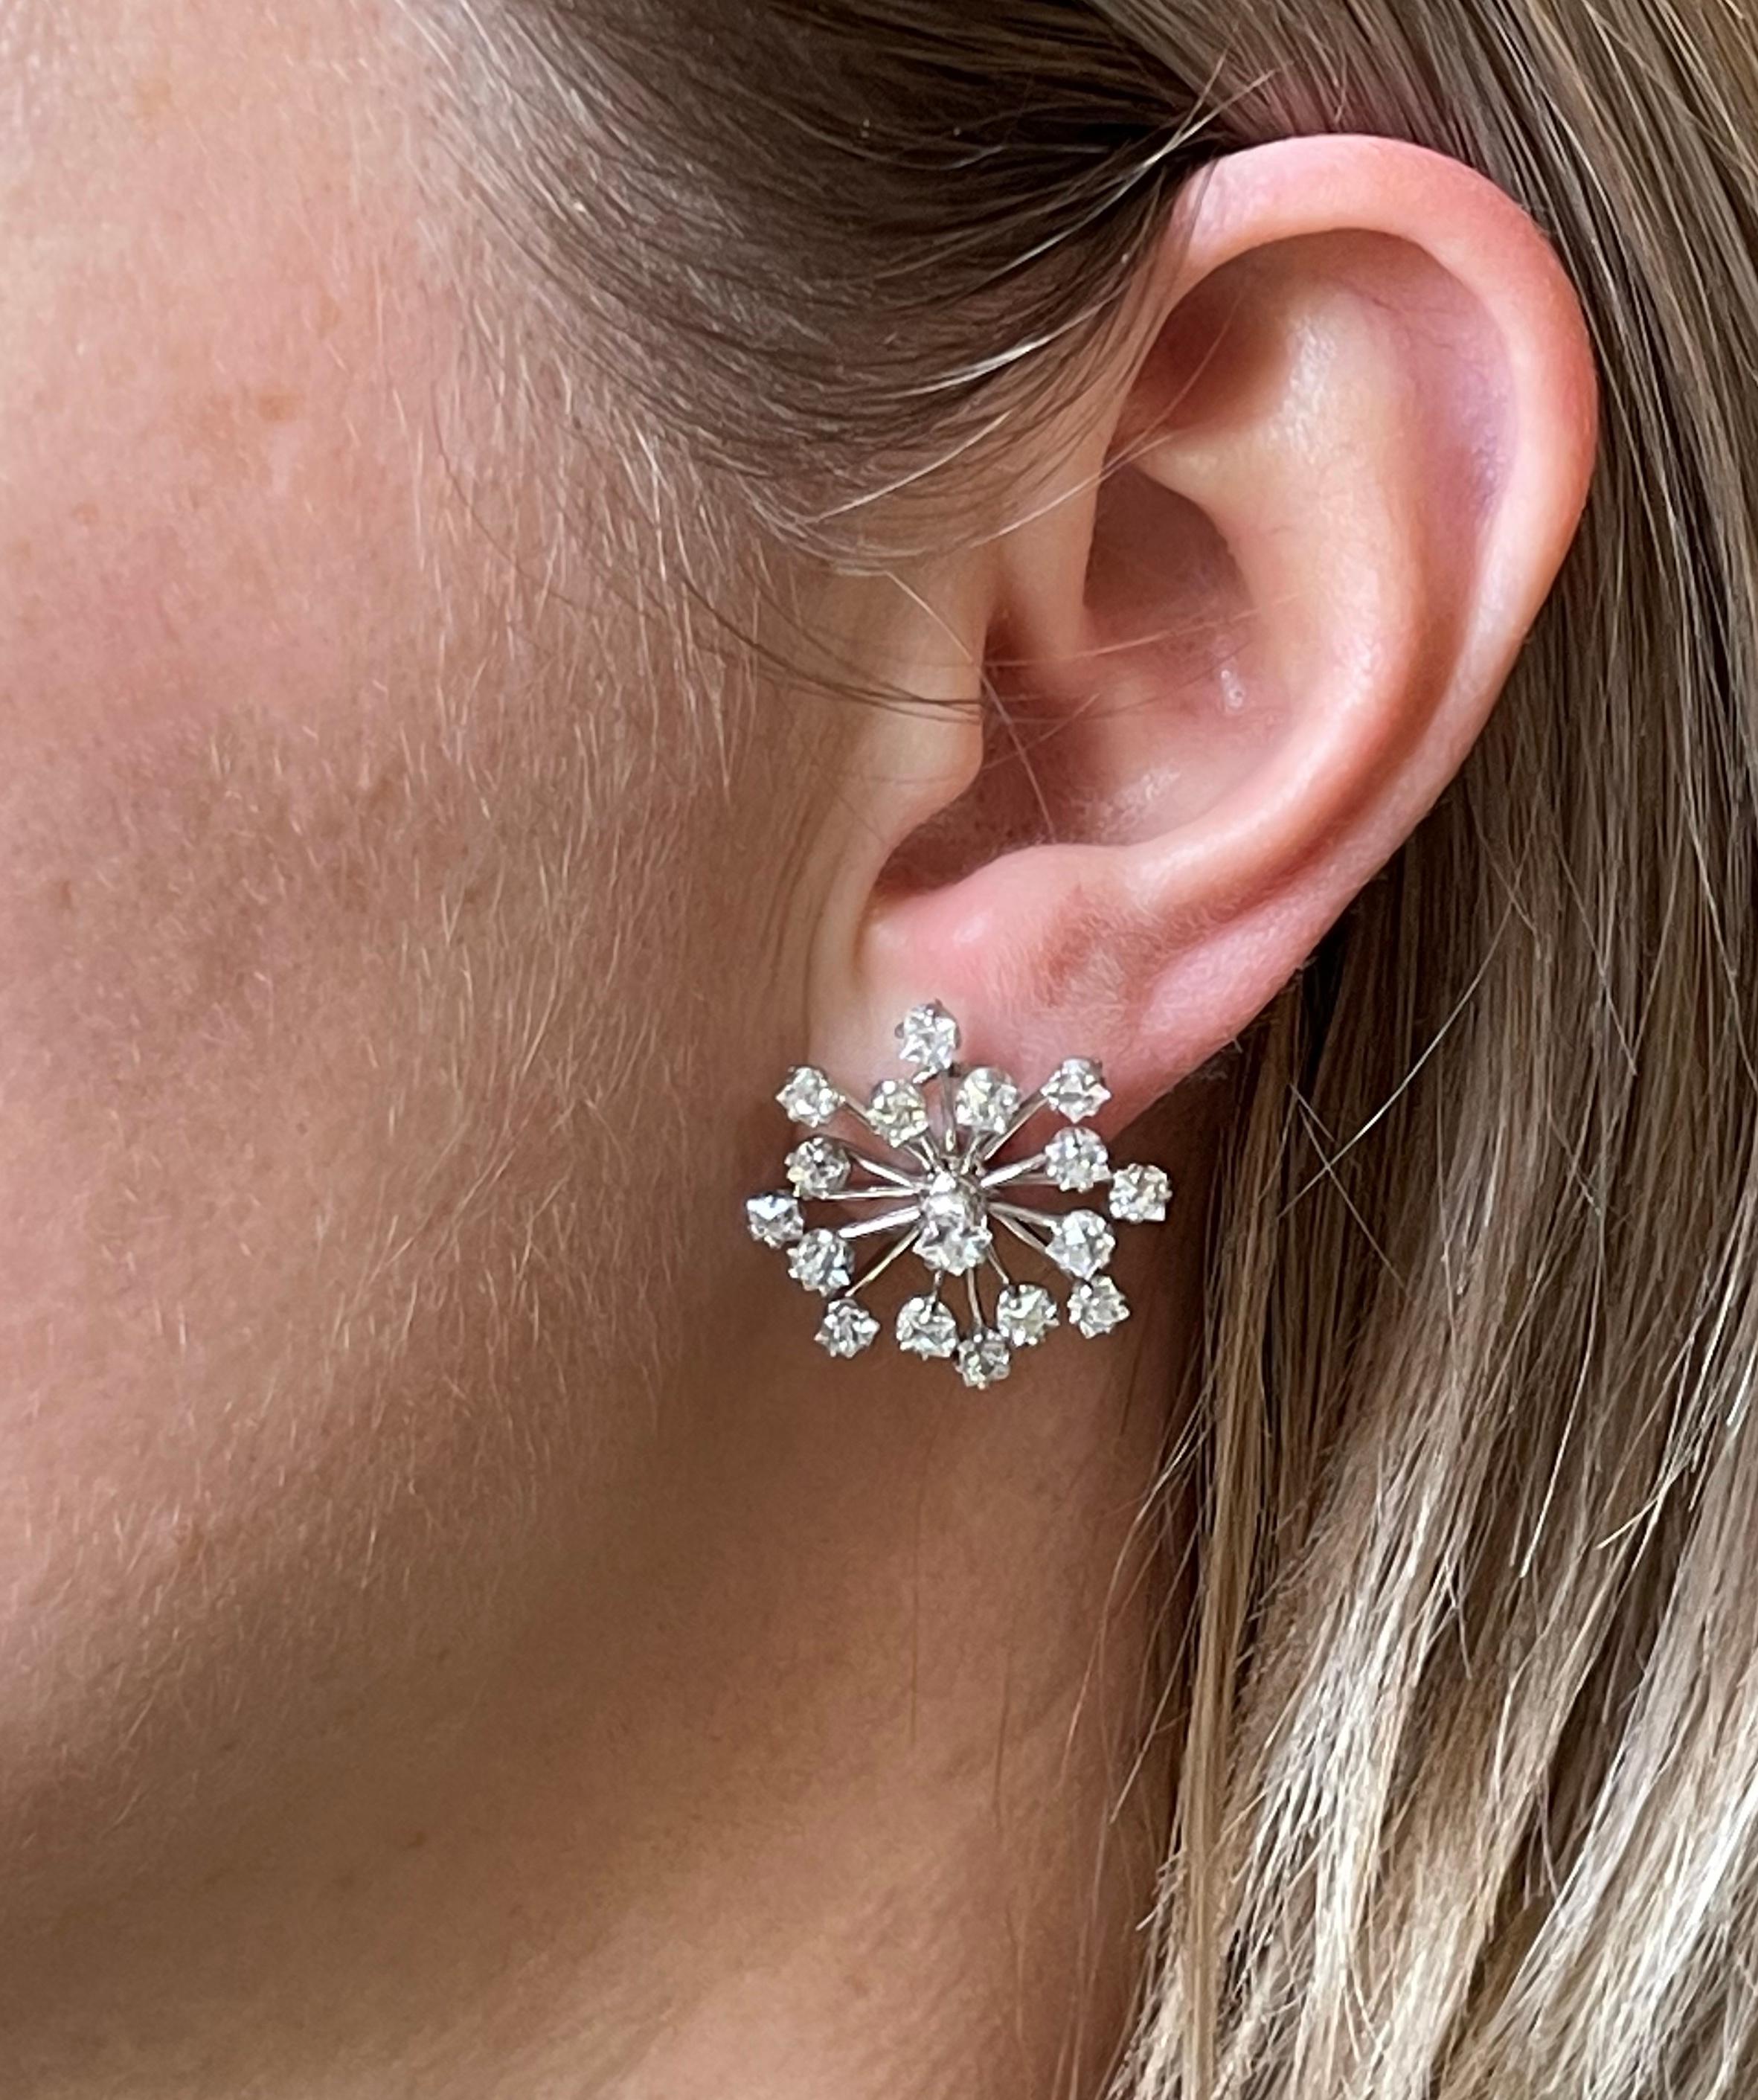 Pair of rare snowflake earrings by Tiffany & Co, in 18k gold and platinum set with approx. 3.50ctw G/VS diamonds. Earrings measure approx. 1